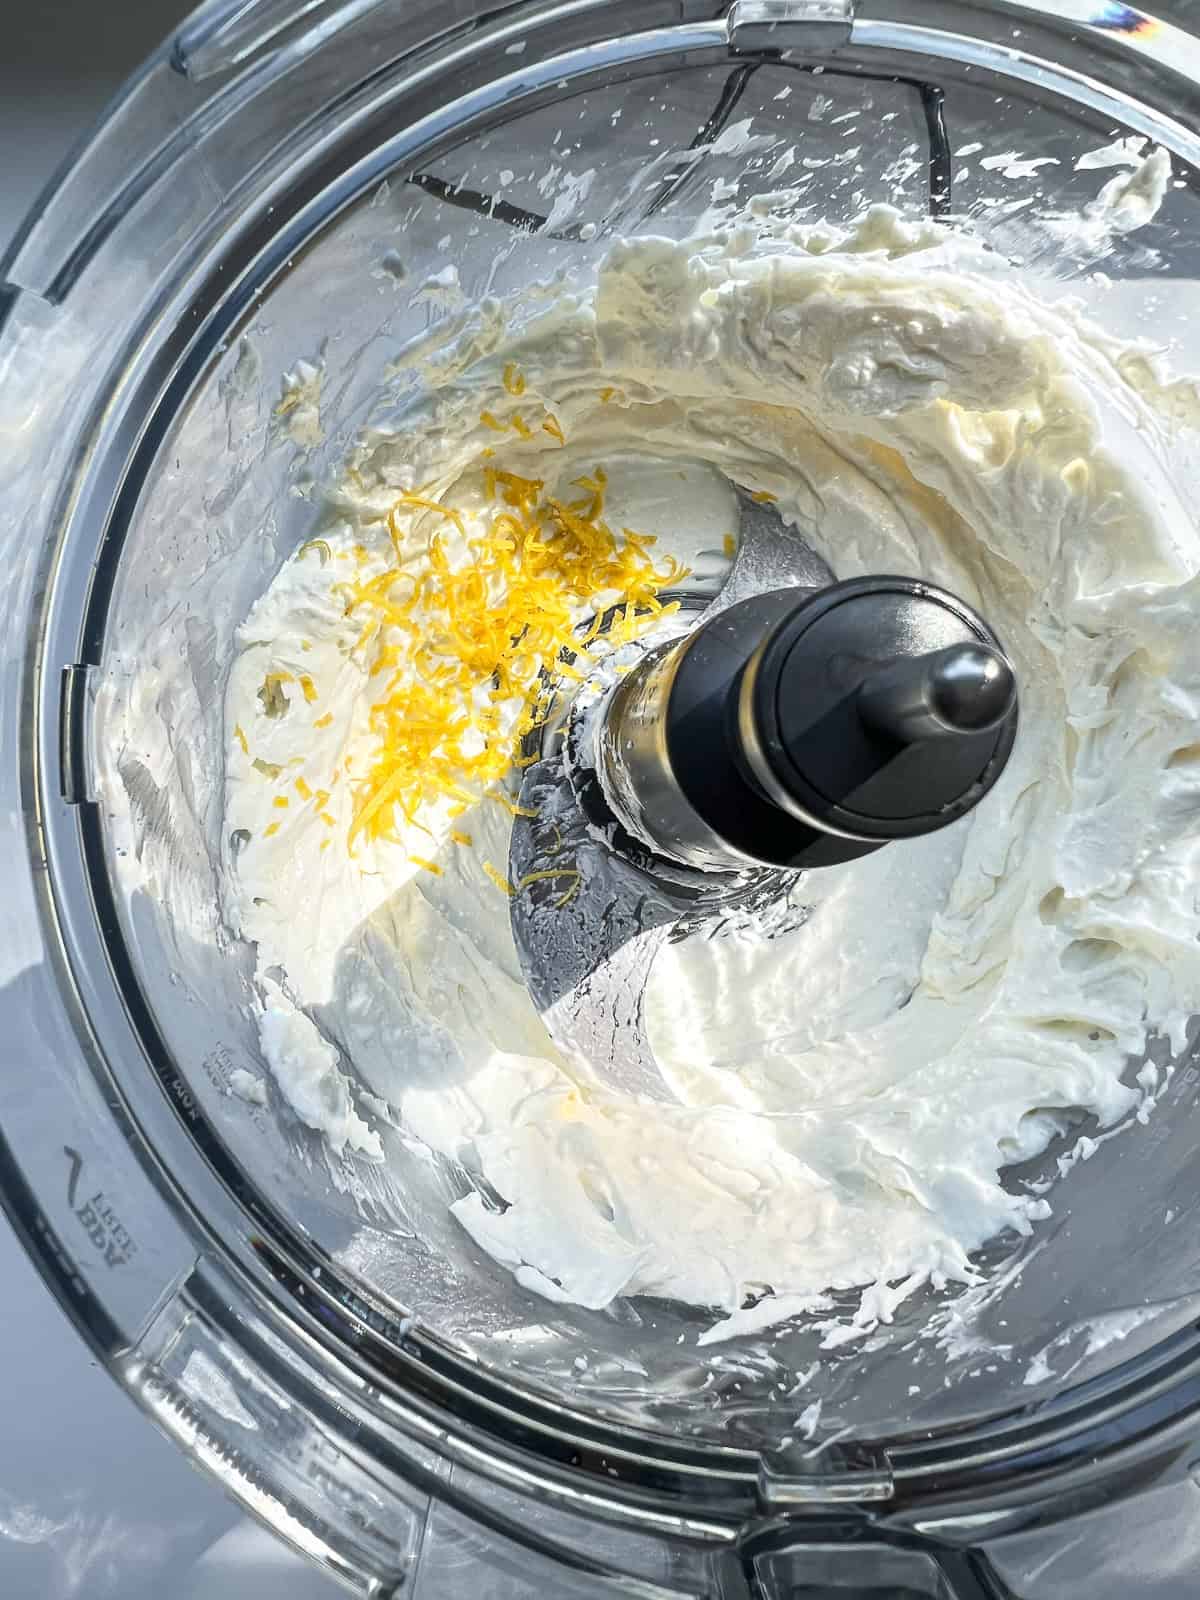 An image of feta, labneh, and garlic in the bowl of a food processor.